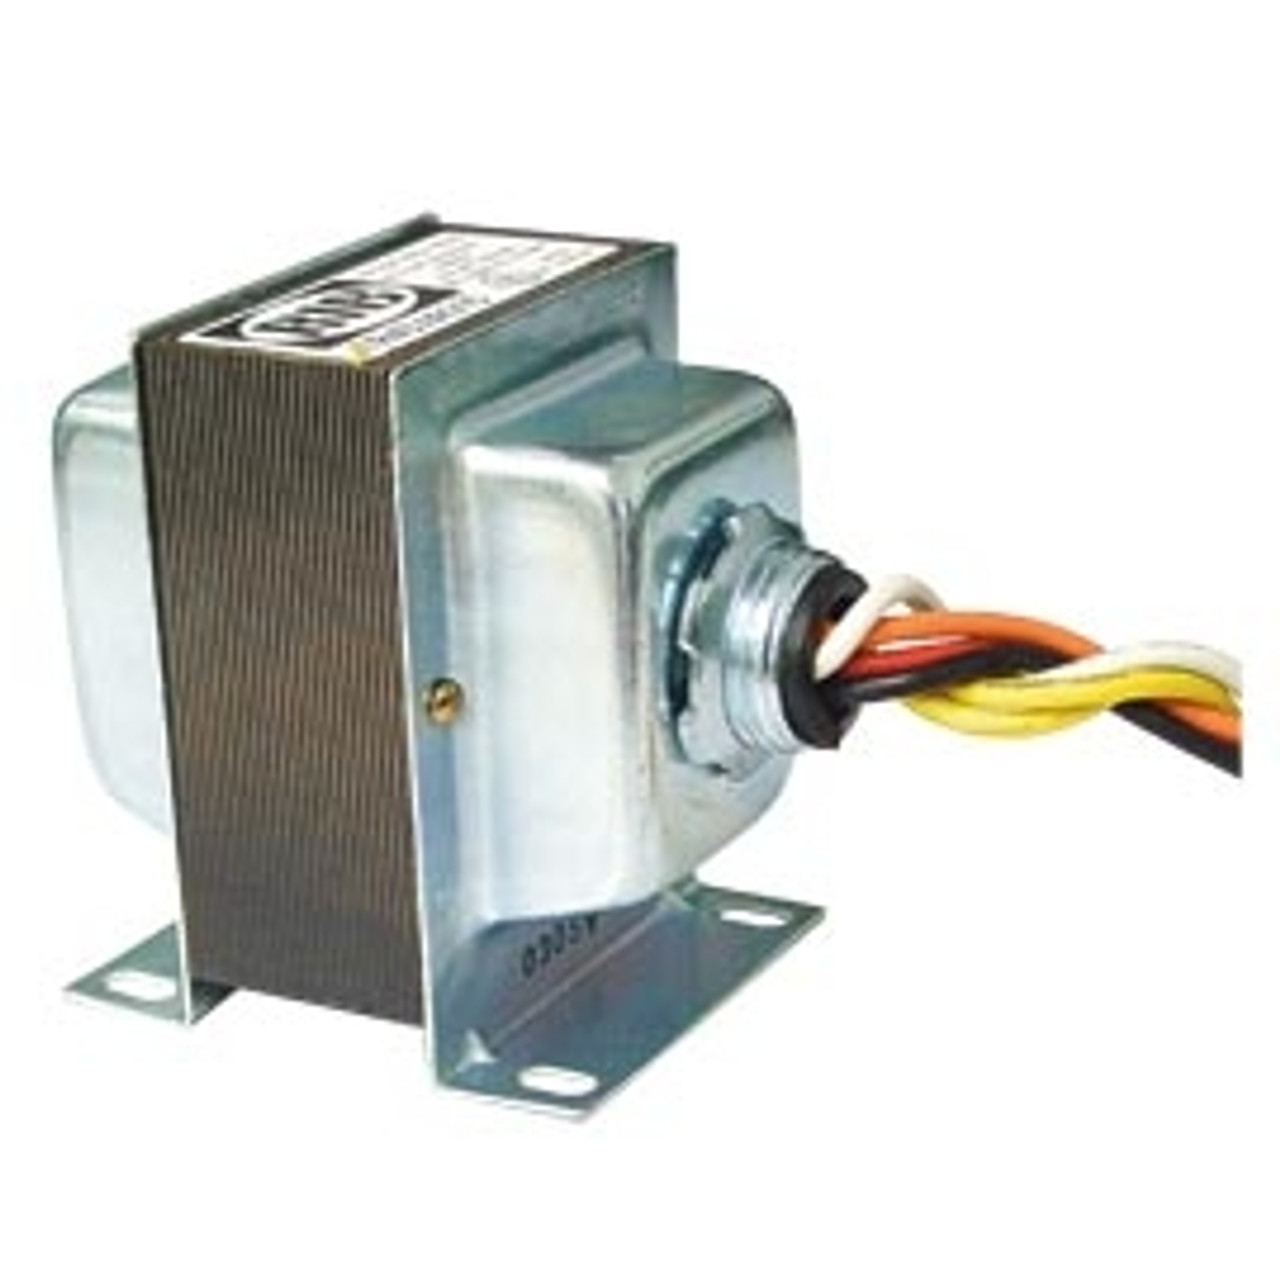 FUNCTIONAL DEVICES FUNTR40VA015 Transformer 40VA, 120/208/240-24V Class 2 UL Listed 1N+Foot w/ Plate